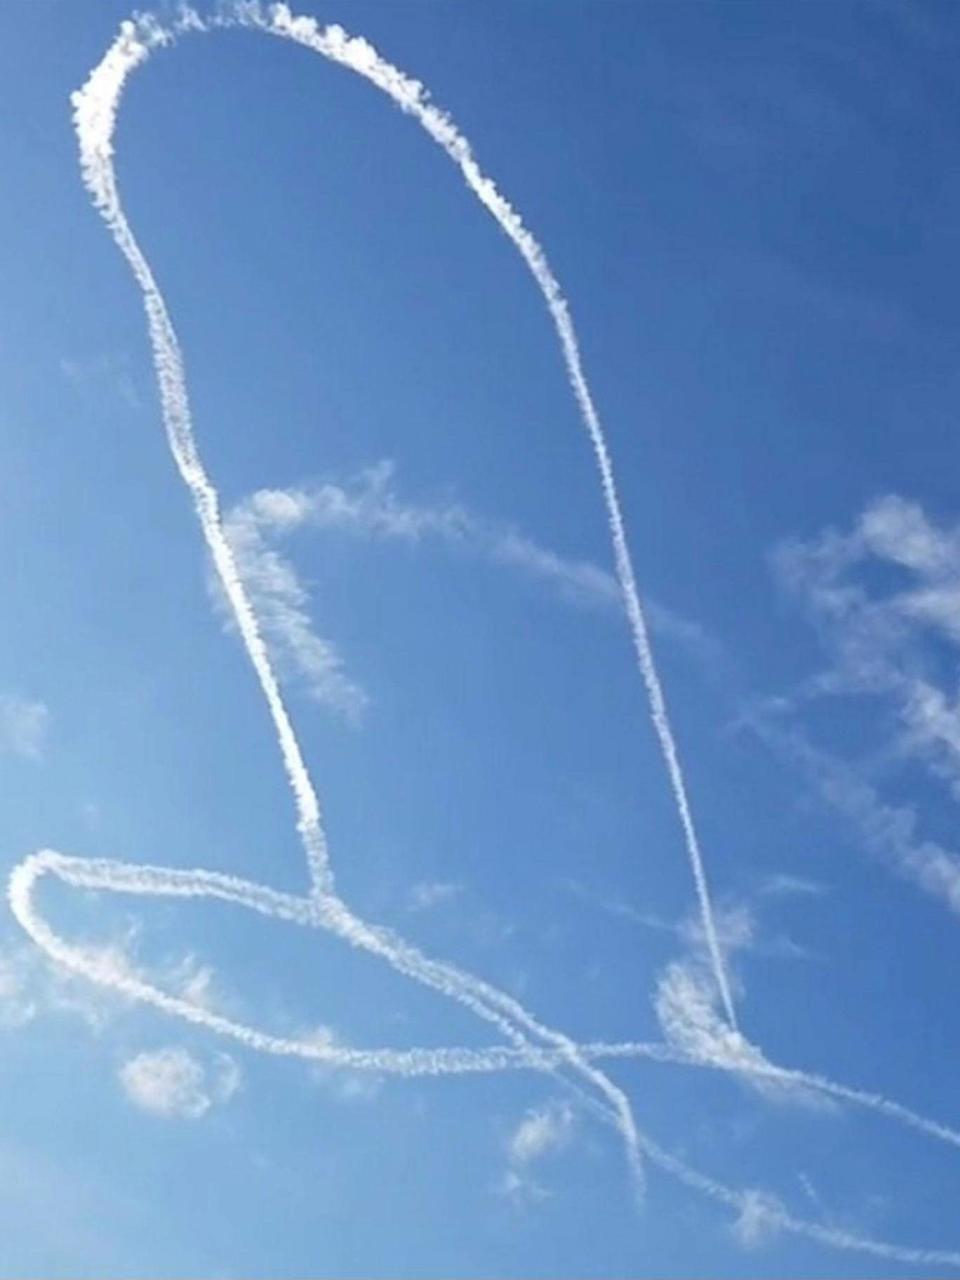 The penis drawn by a US Navy air crew with the exhaust of an advanced fighter jet is seen in the skies over Okanogan County in Washington state (INSTAGRAM @RREED.69/via REUTERS)